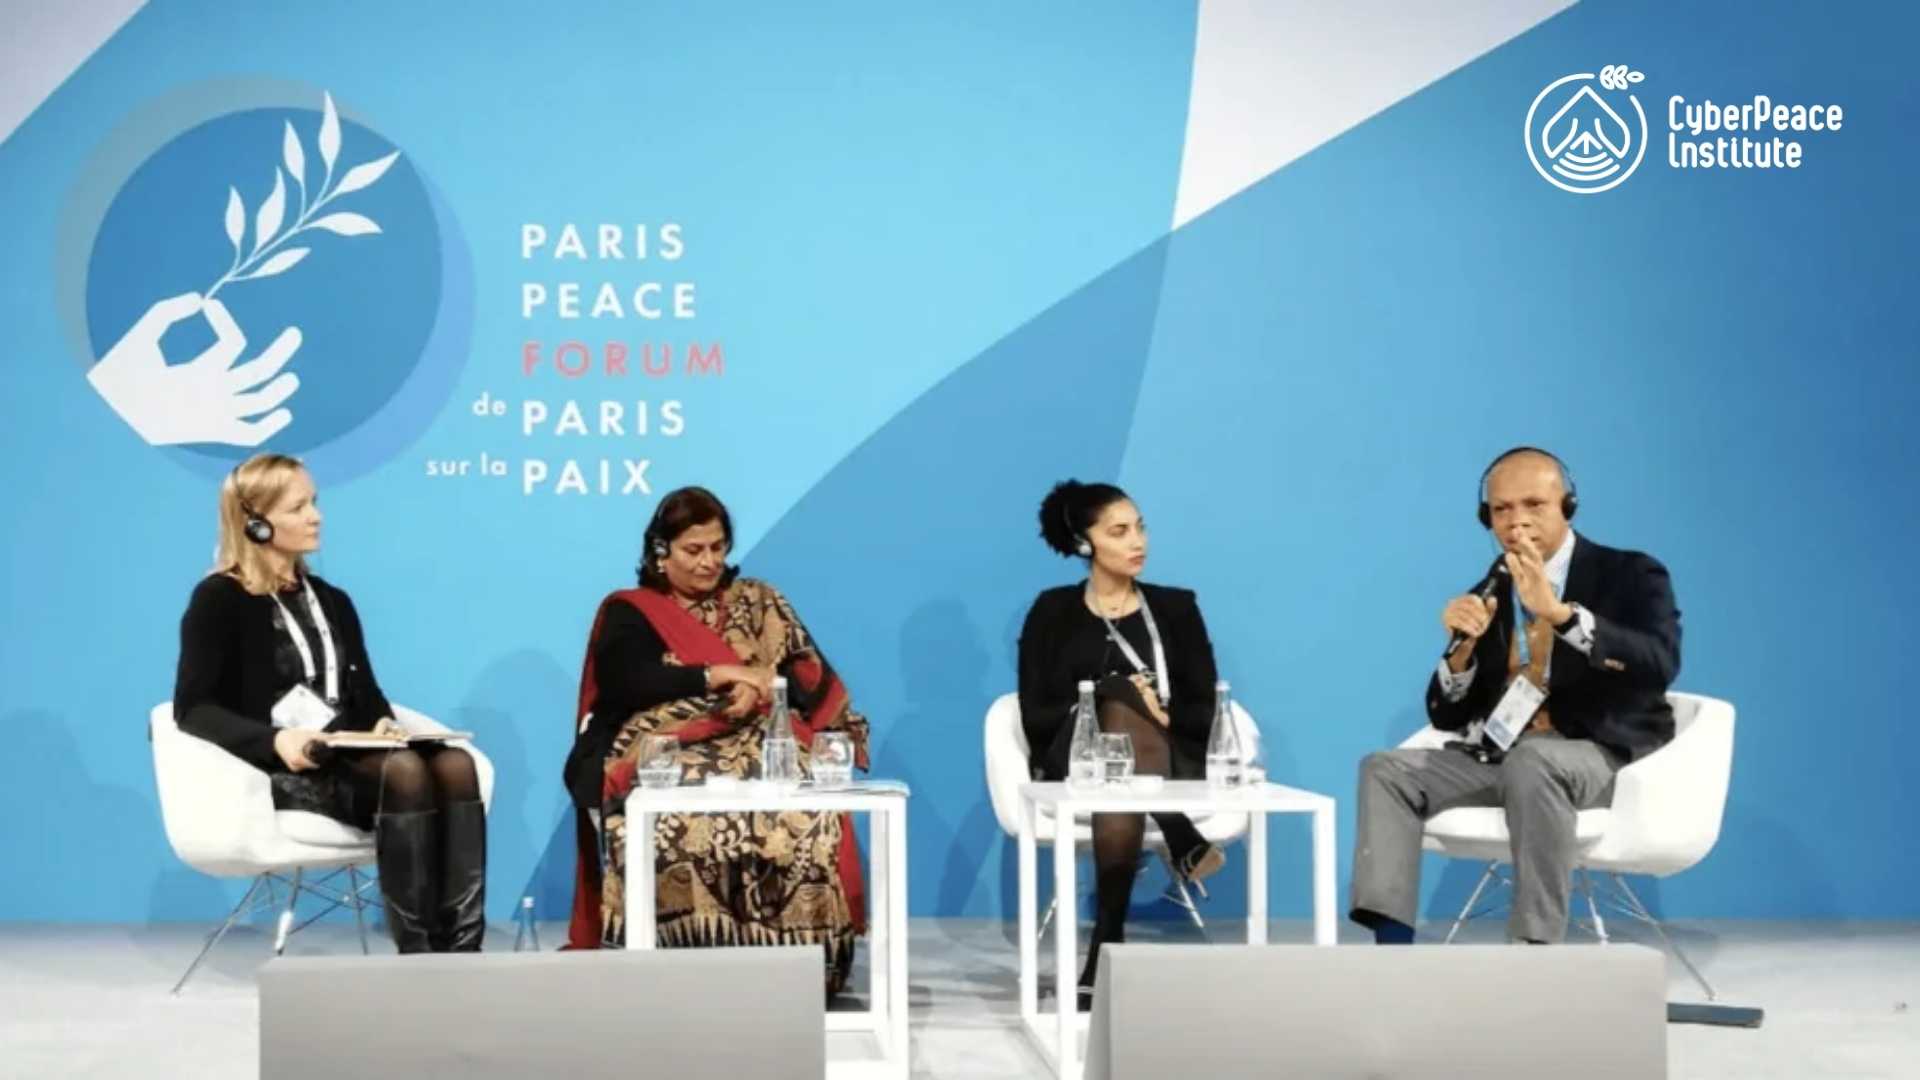 Insights from the CyberPeace Institute’s Event at the Paris Peace Forum